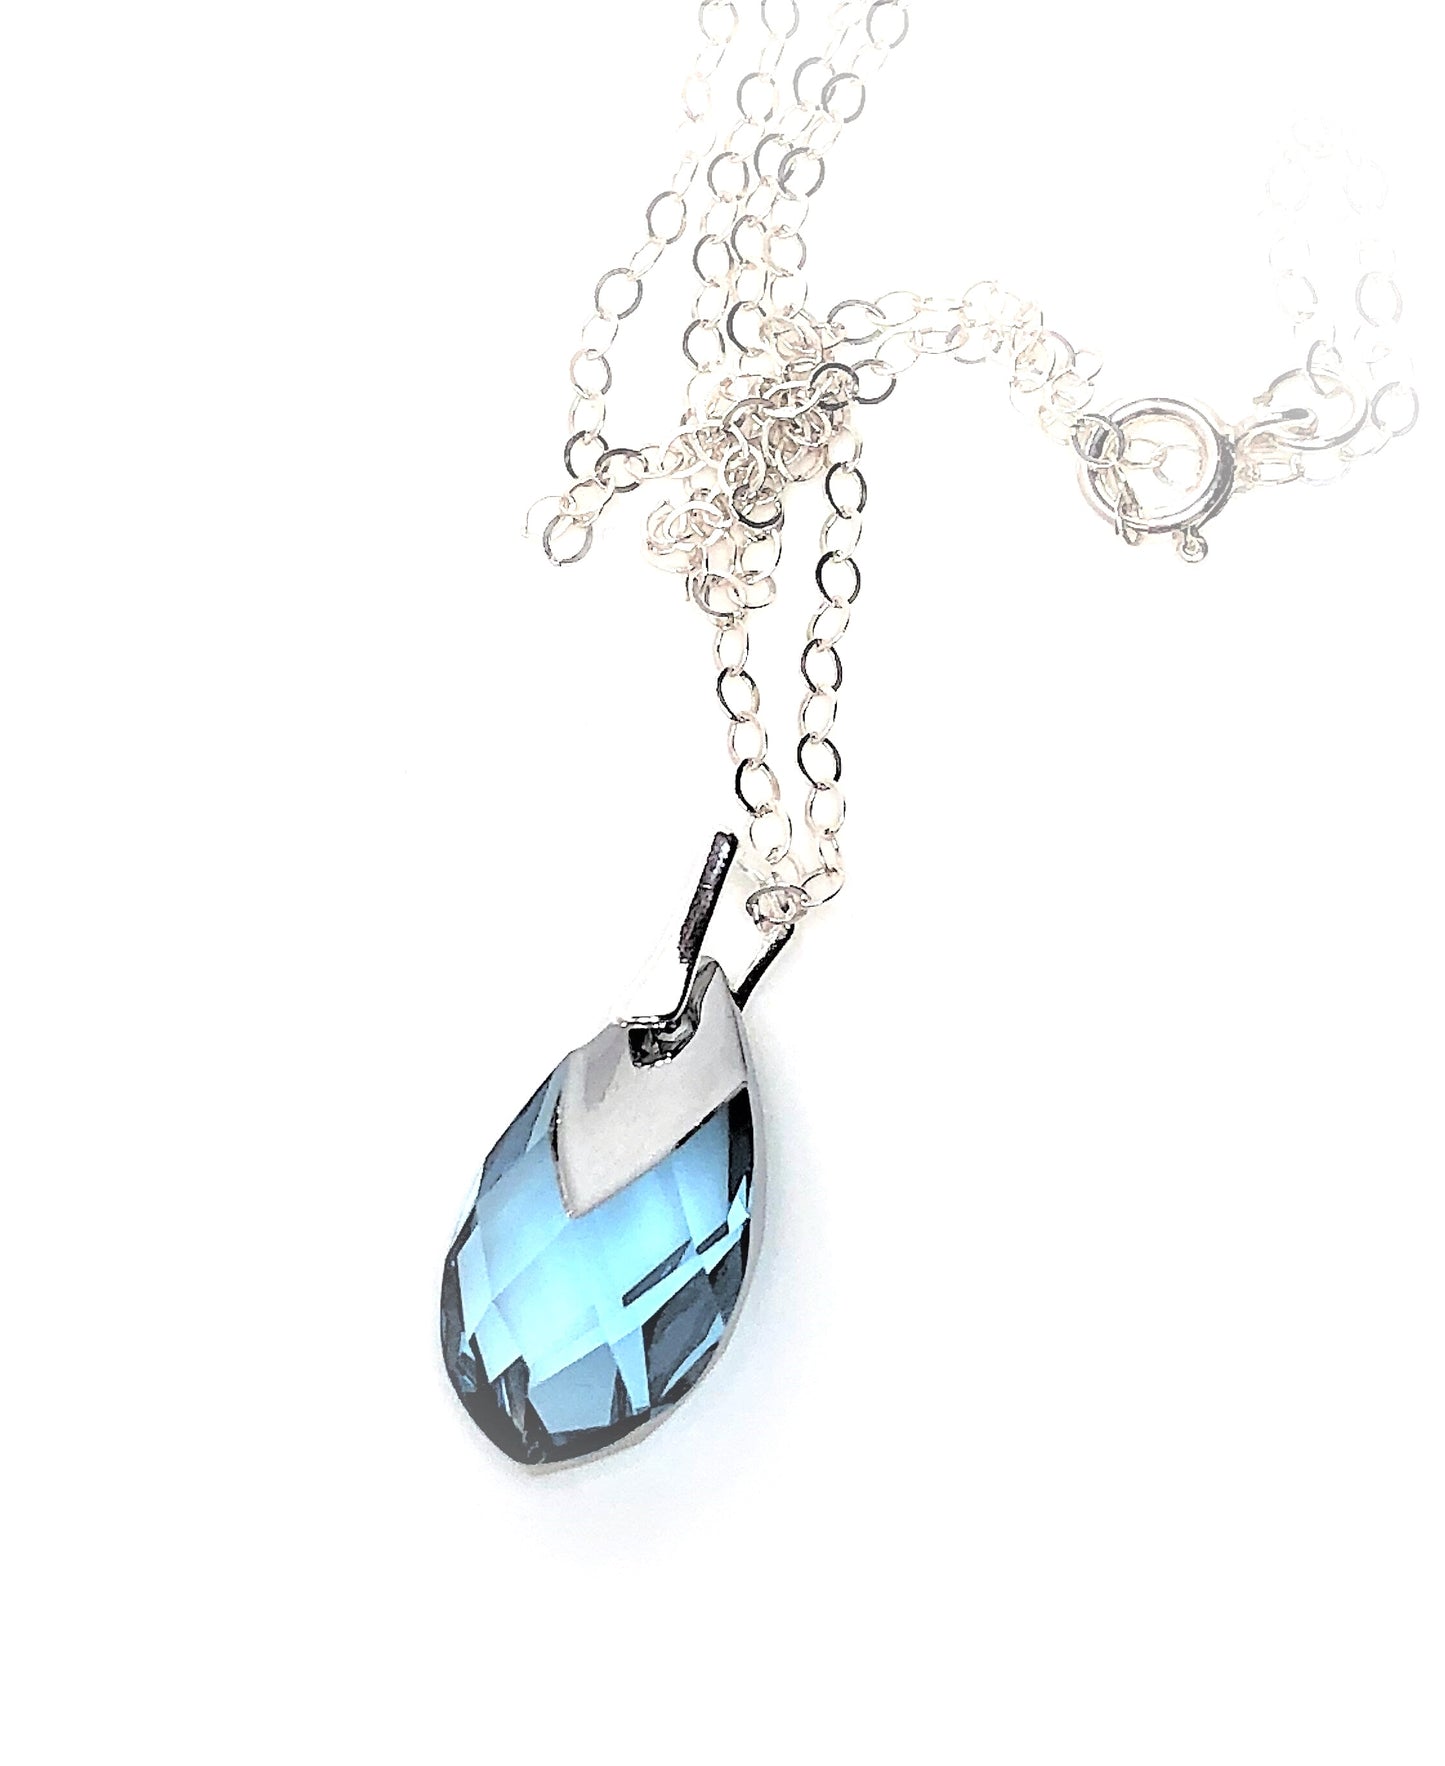 Aquamarine Crystal Pendant | Blue Sparkly Necklace | Blue Crystal Teardrop | Necklaces for Women